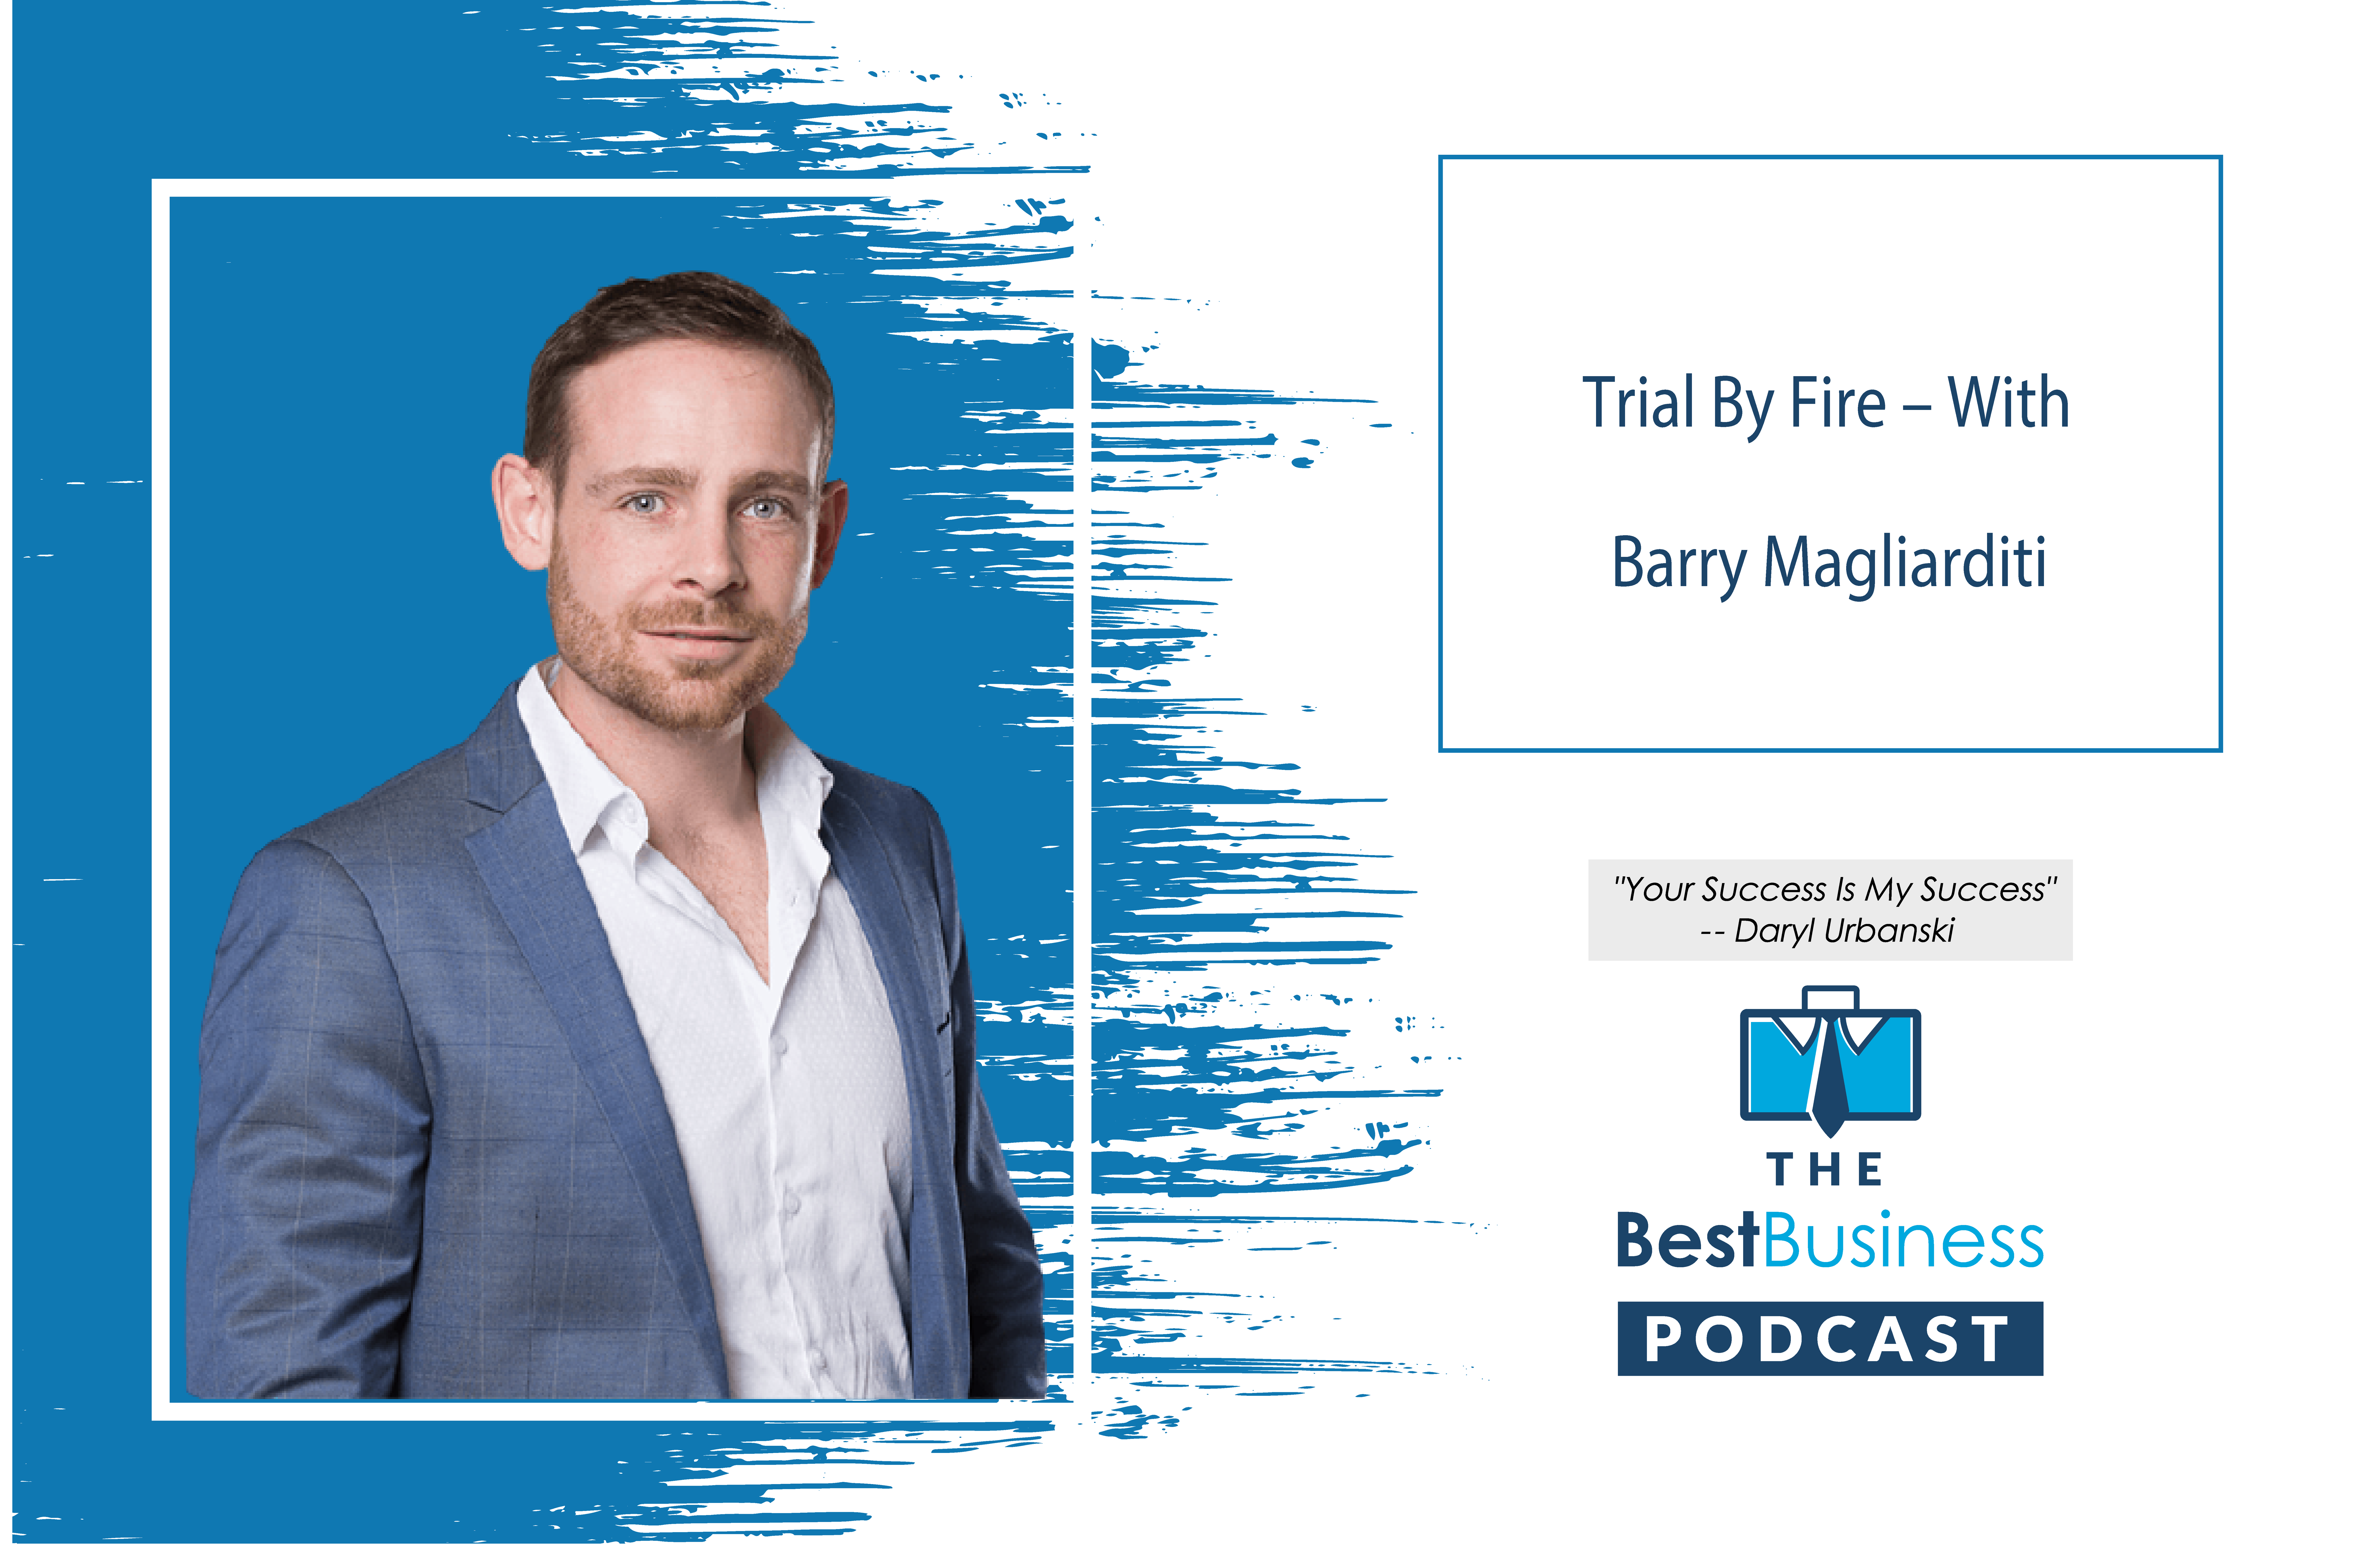 Barry Magliarditi, Business coaching services